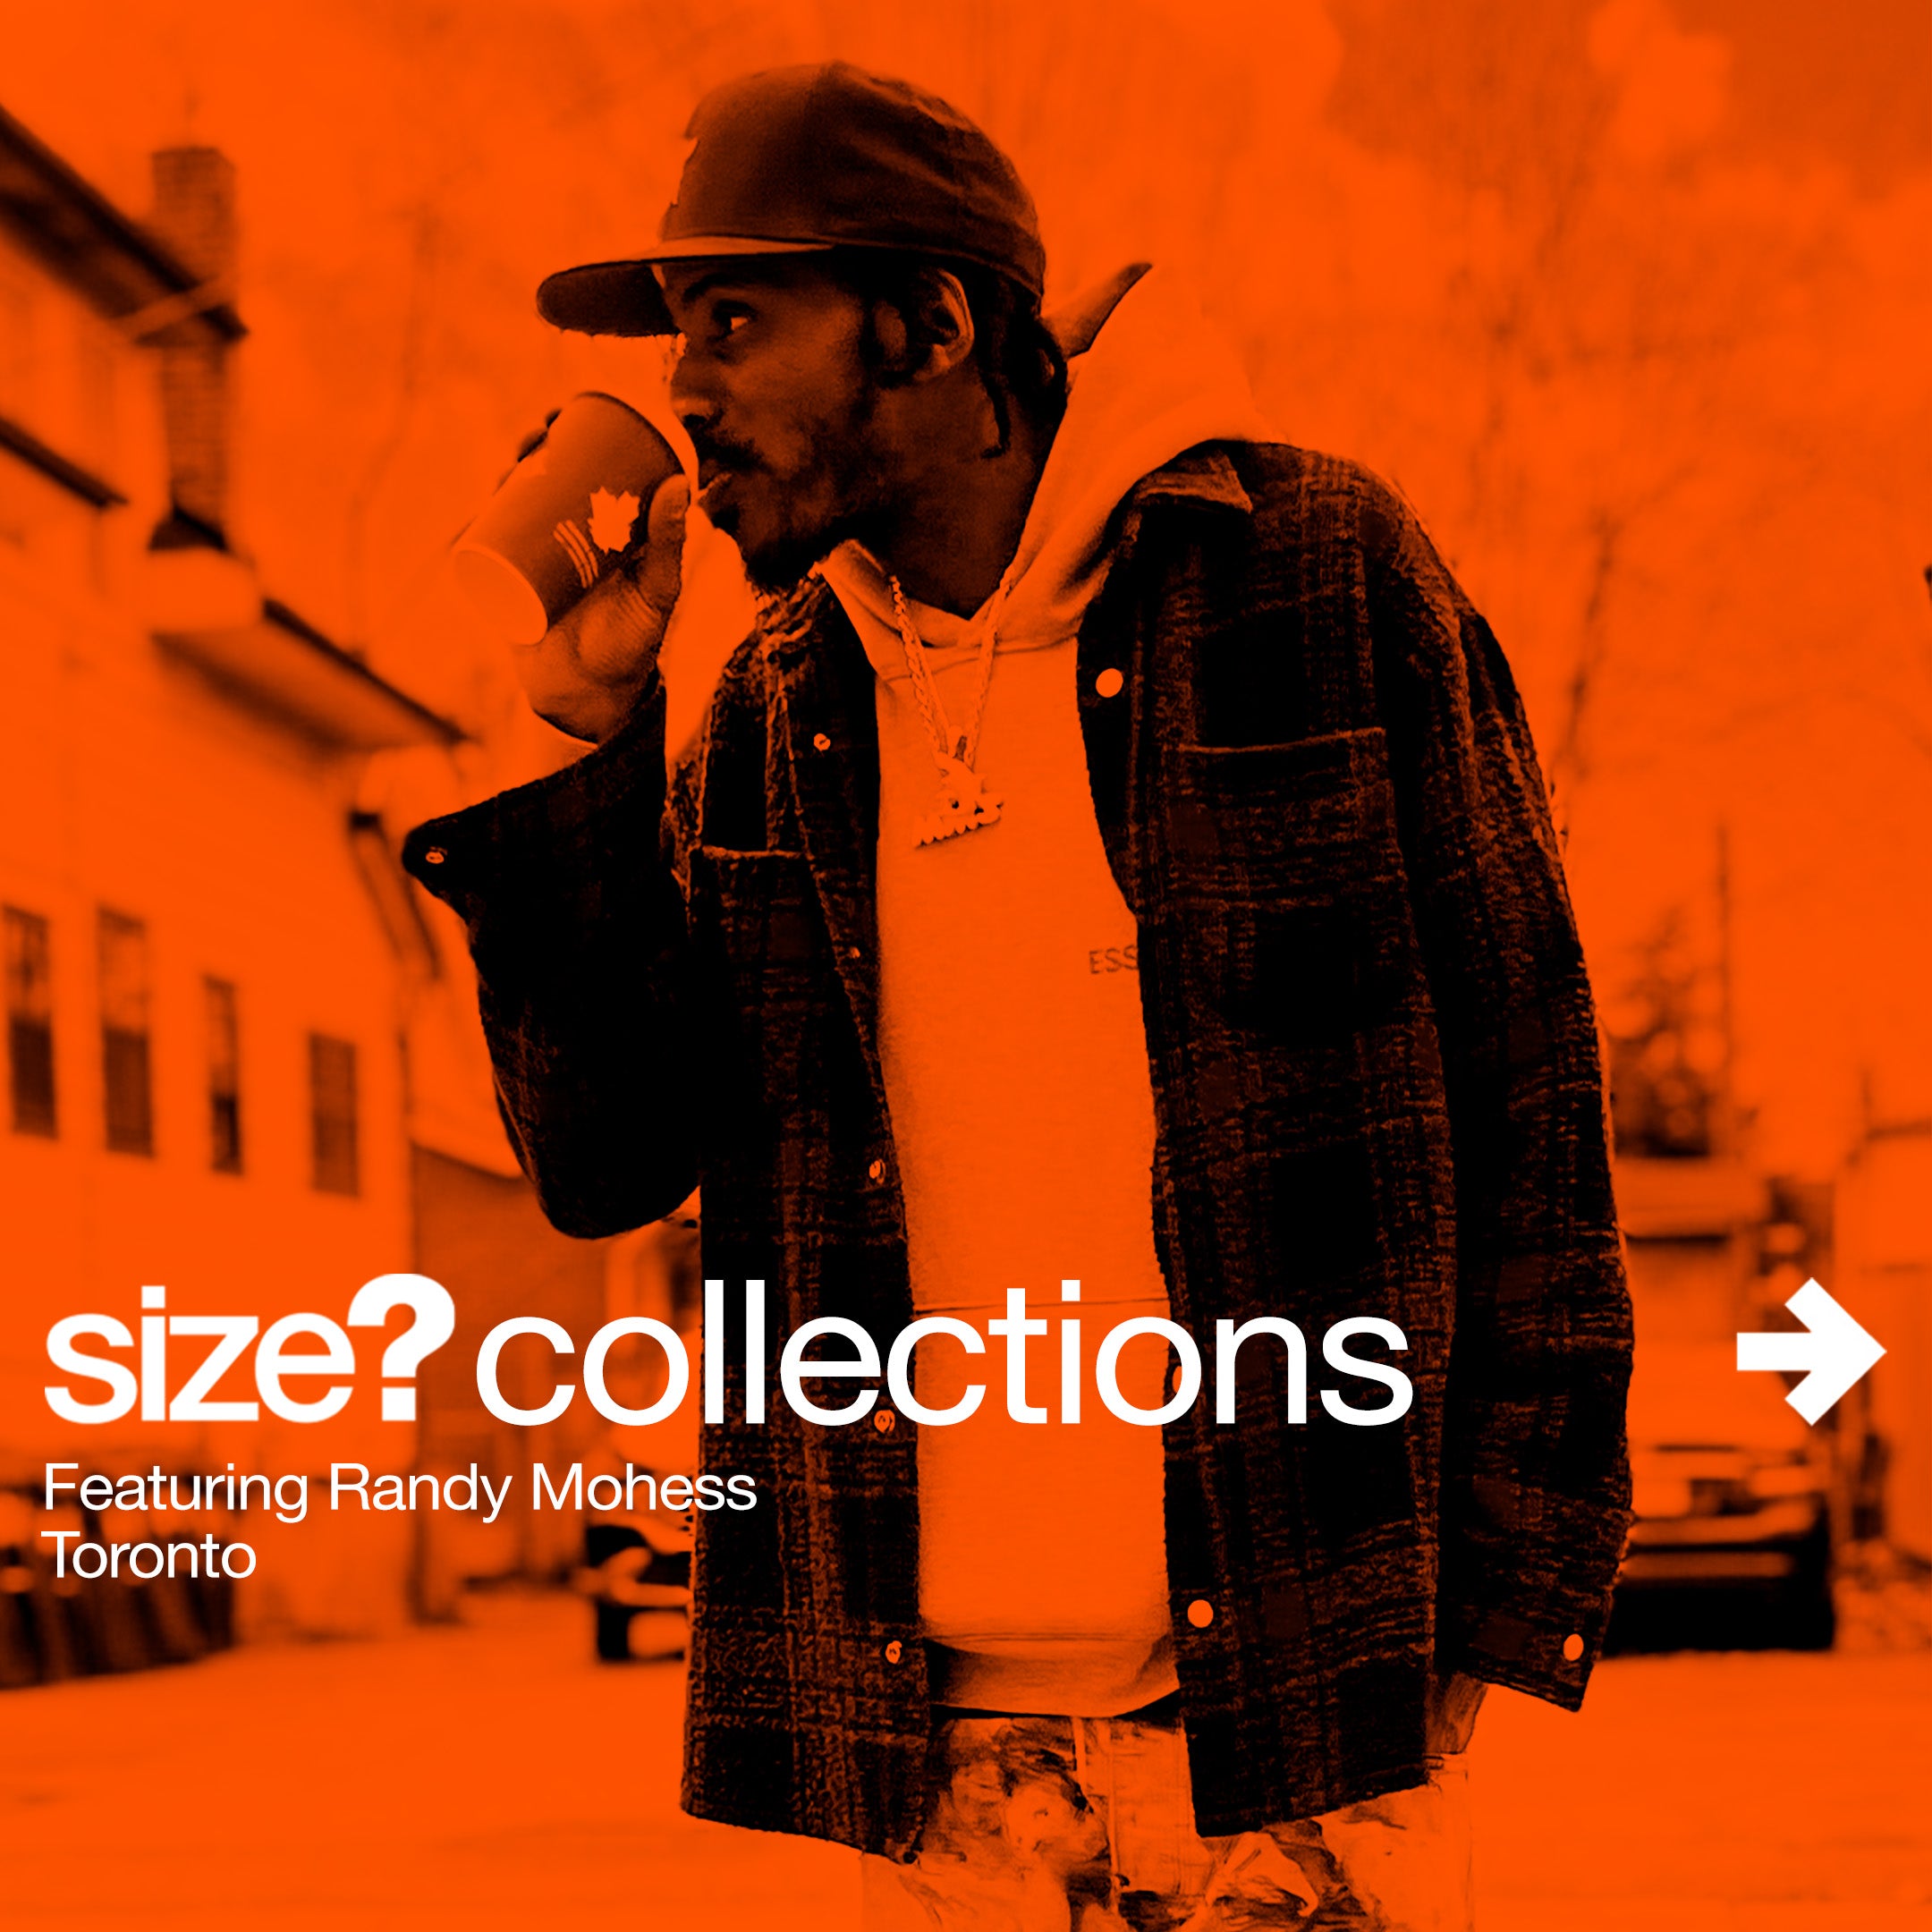 size?collections – Randy Mohess